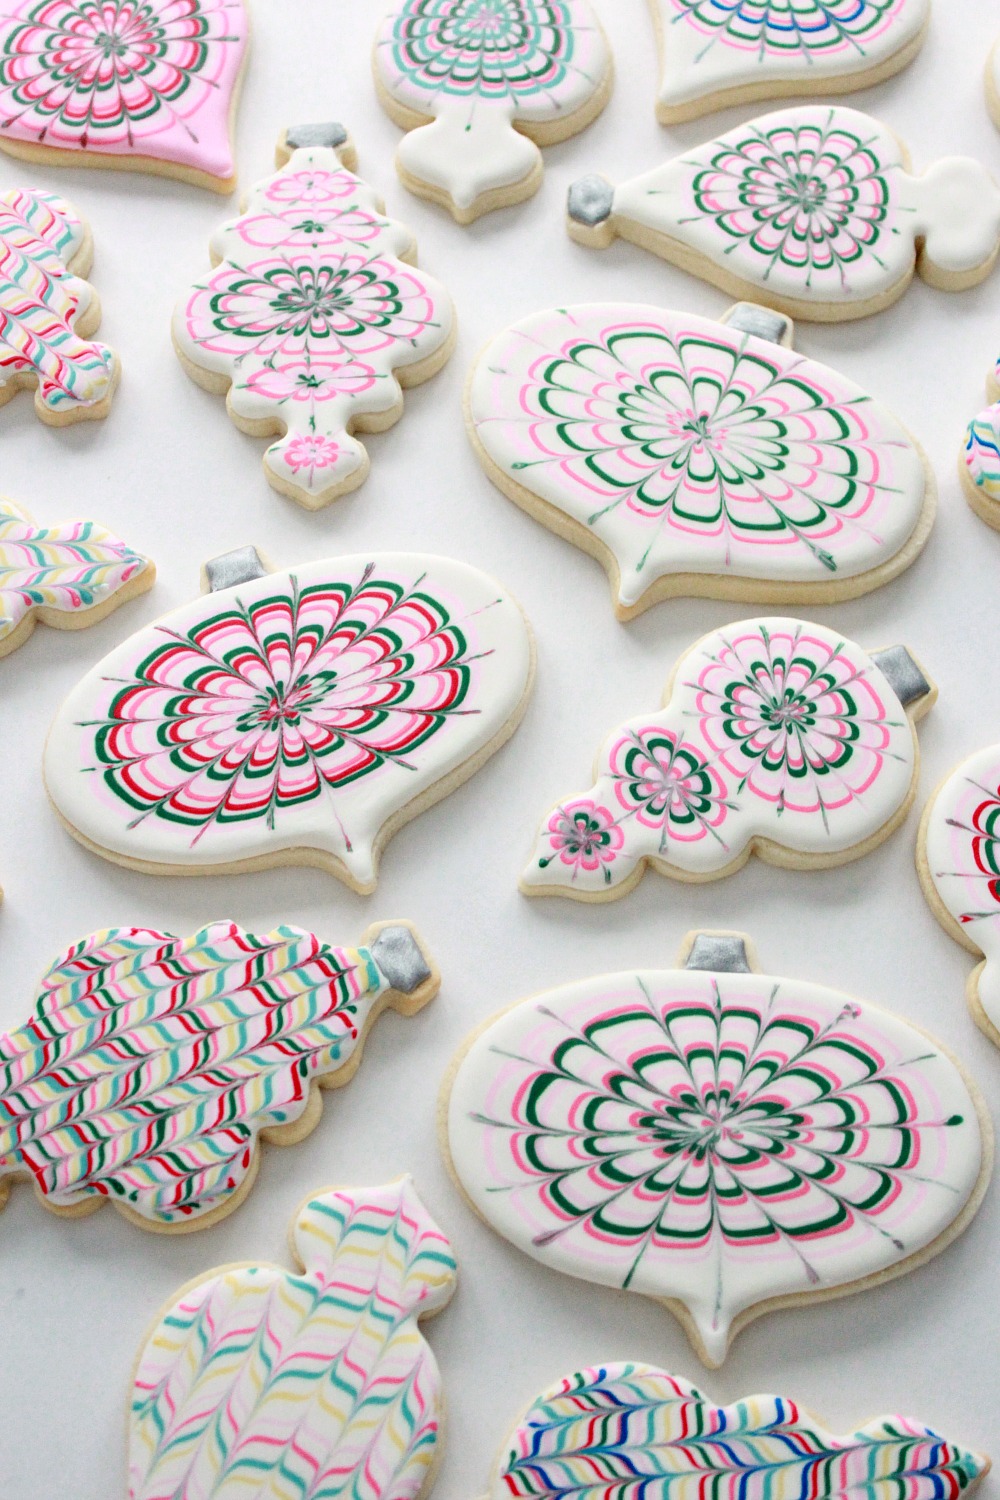 Royal Icing Cookie Decorating Tips | Sweetopia